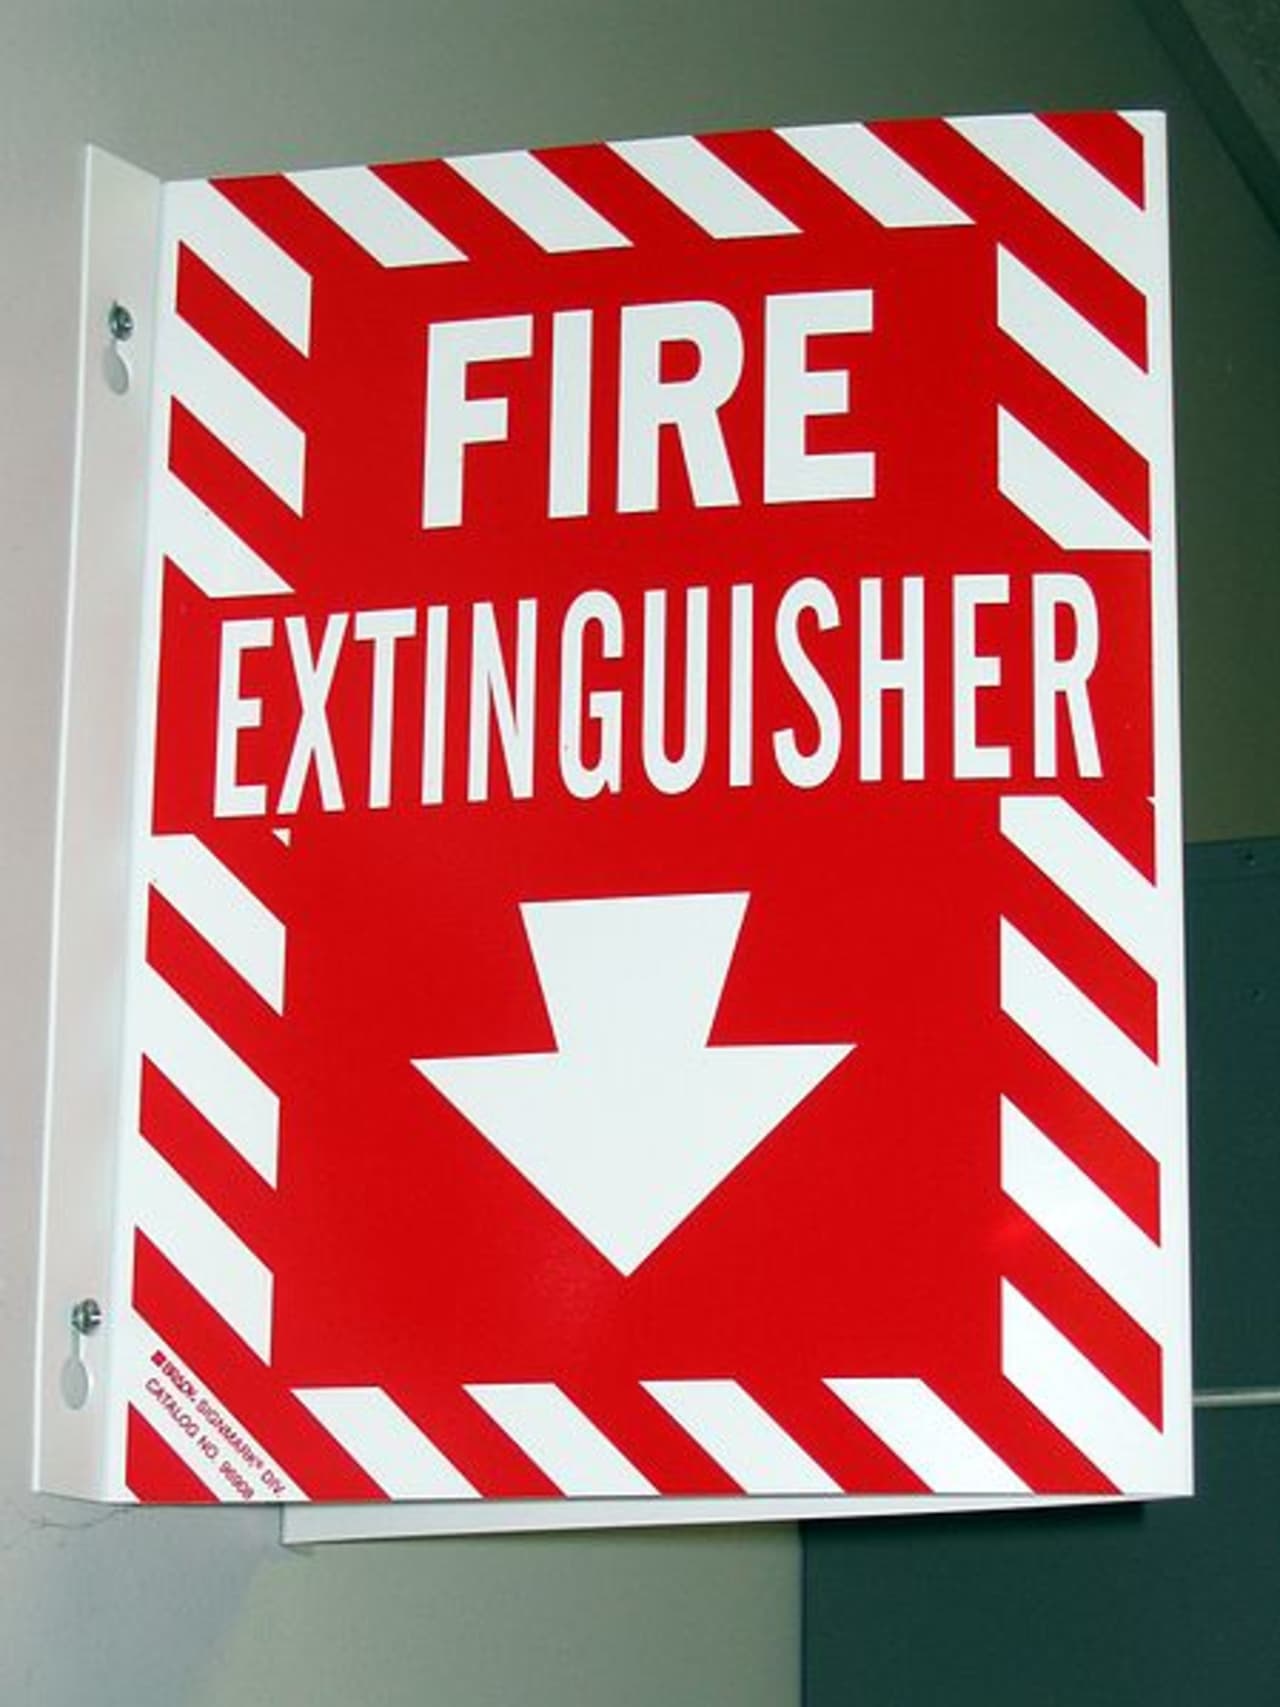 Fire extinguishers are being recalled.